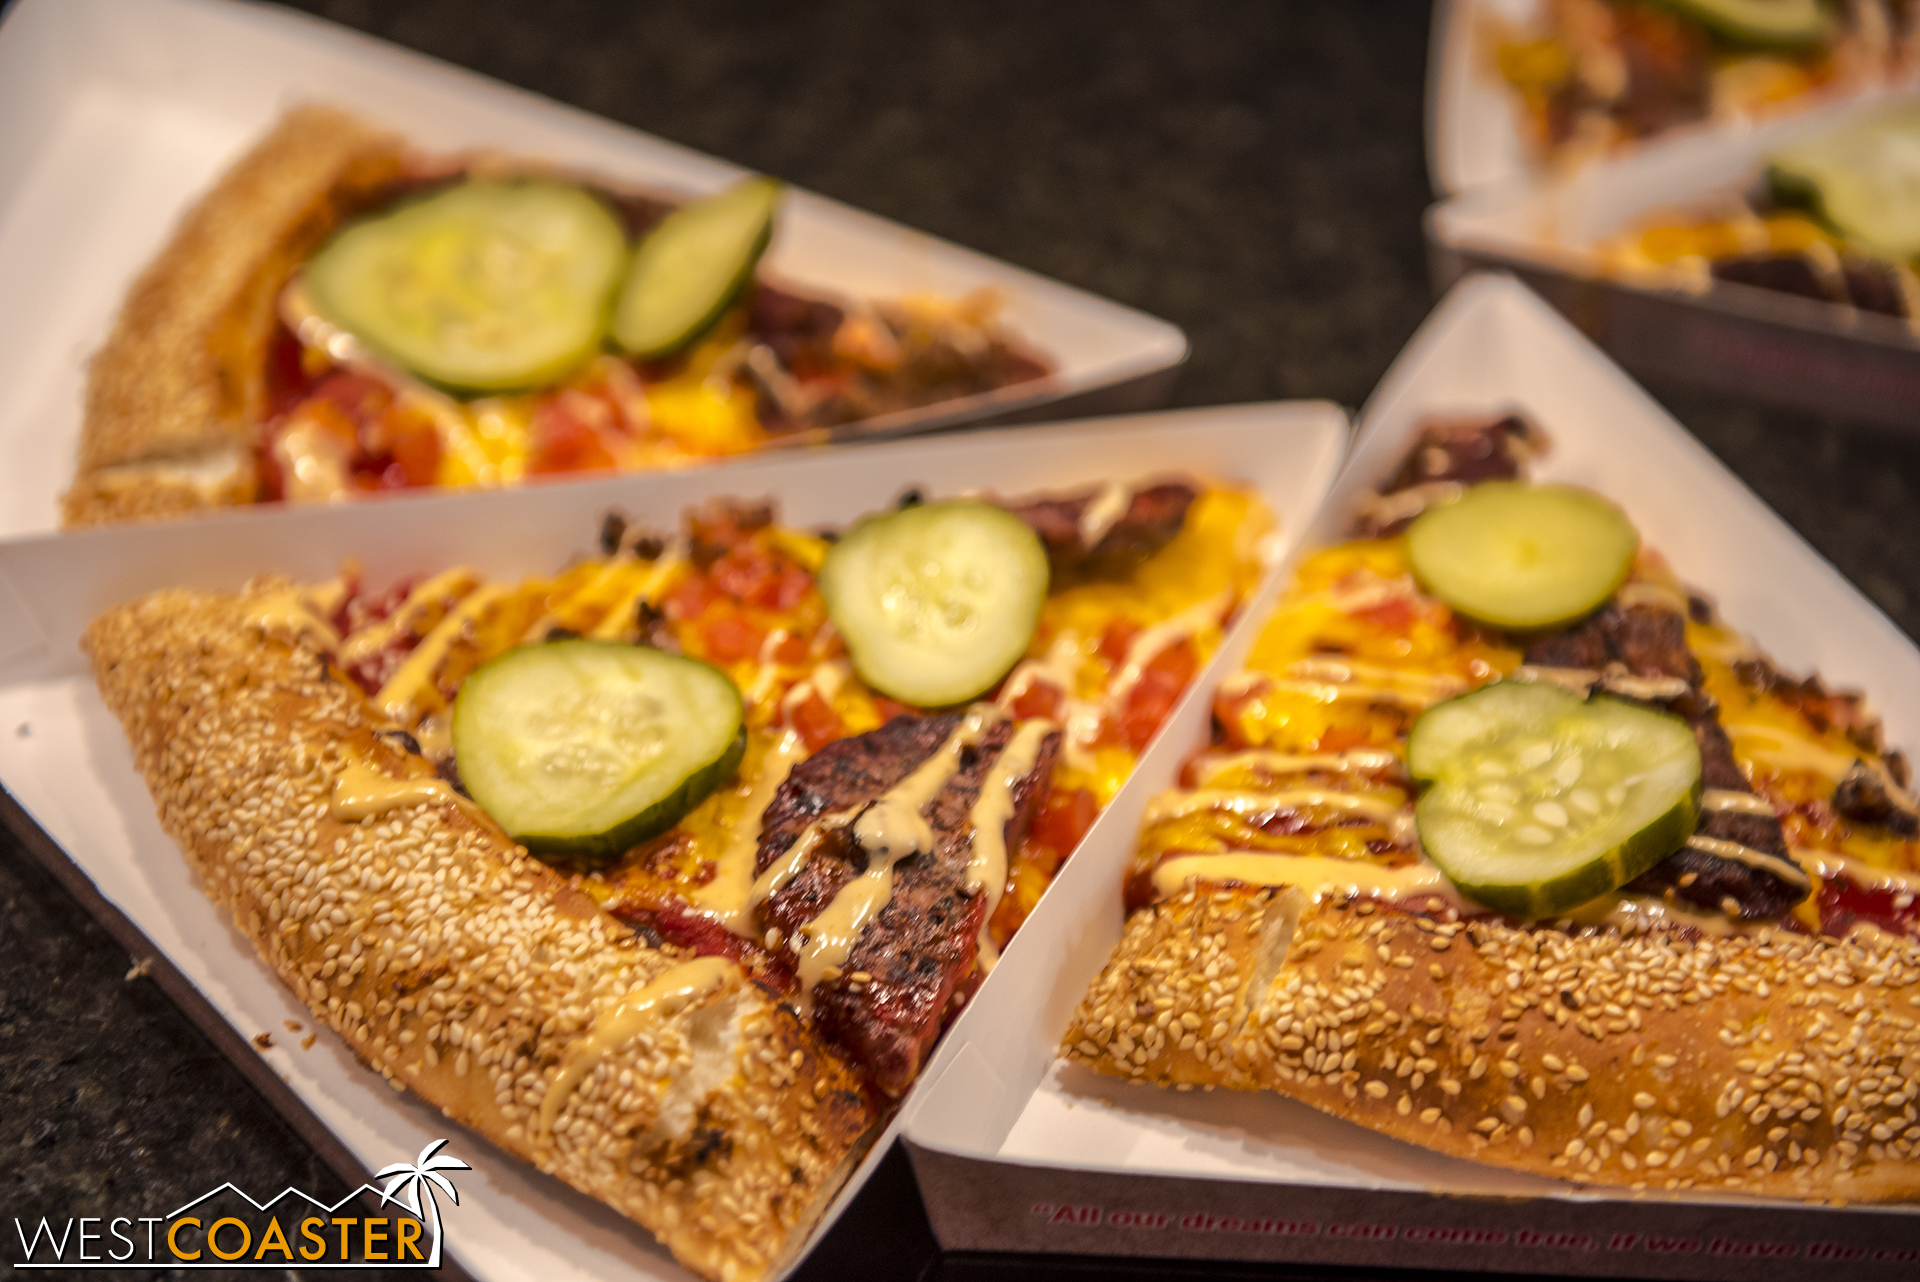  There’s also a Cheeseburger Pizza. 